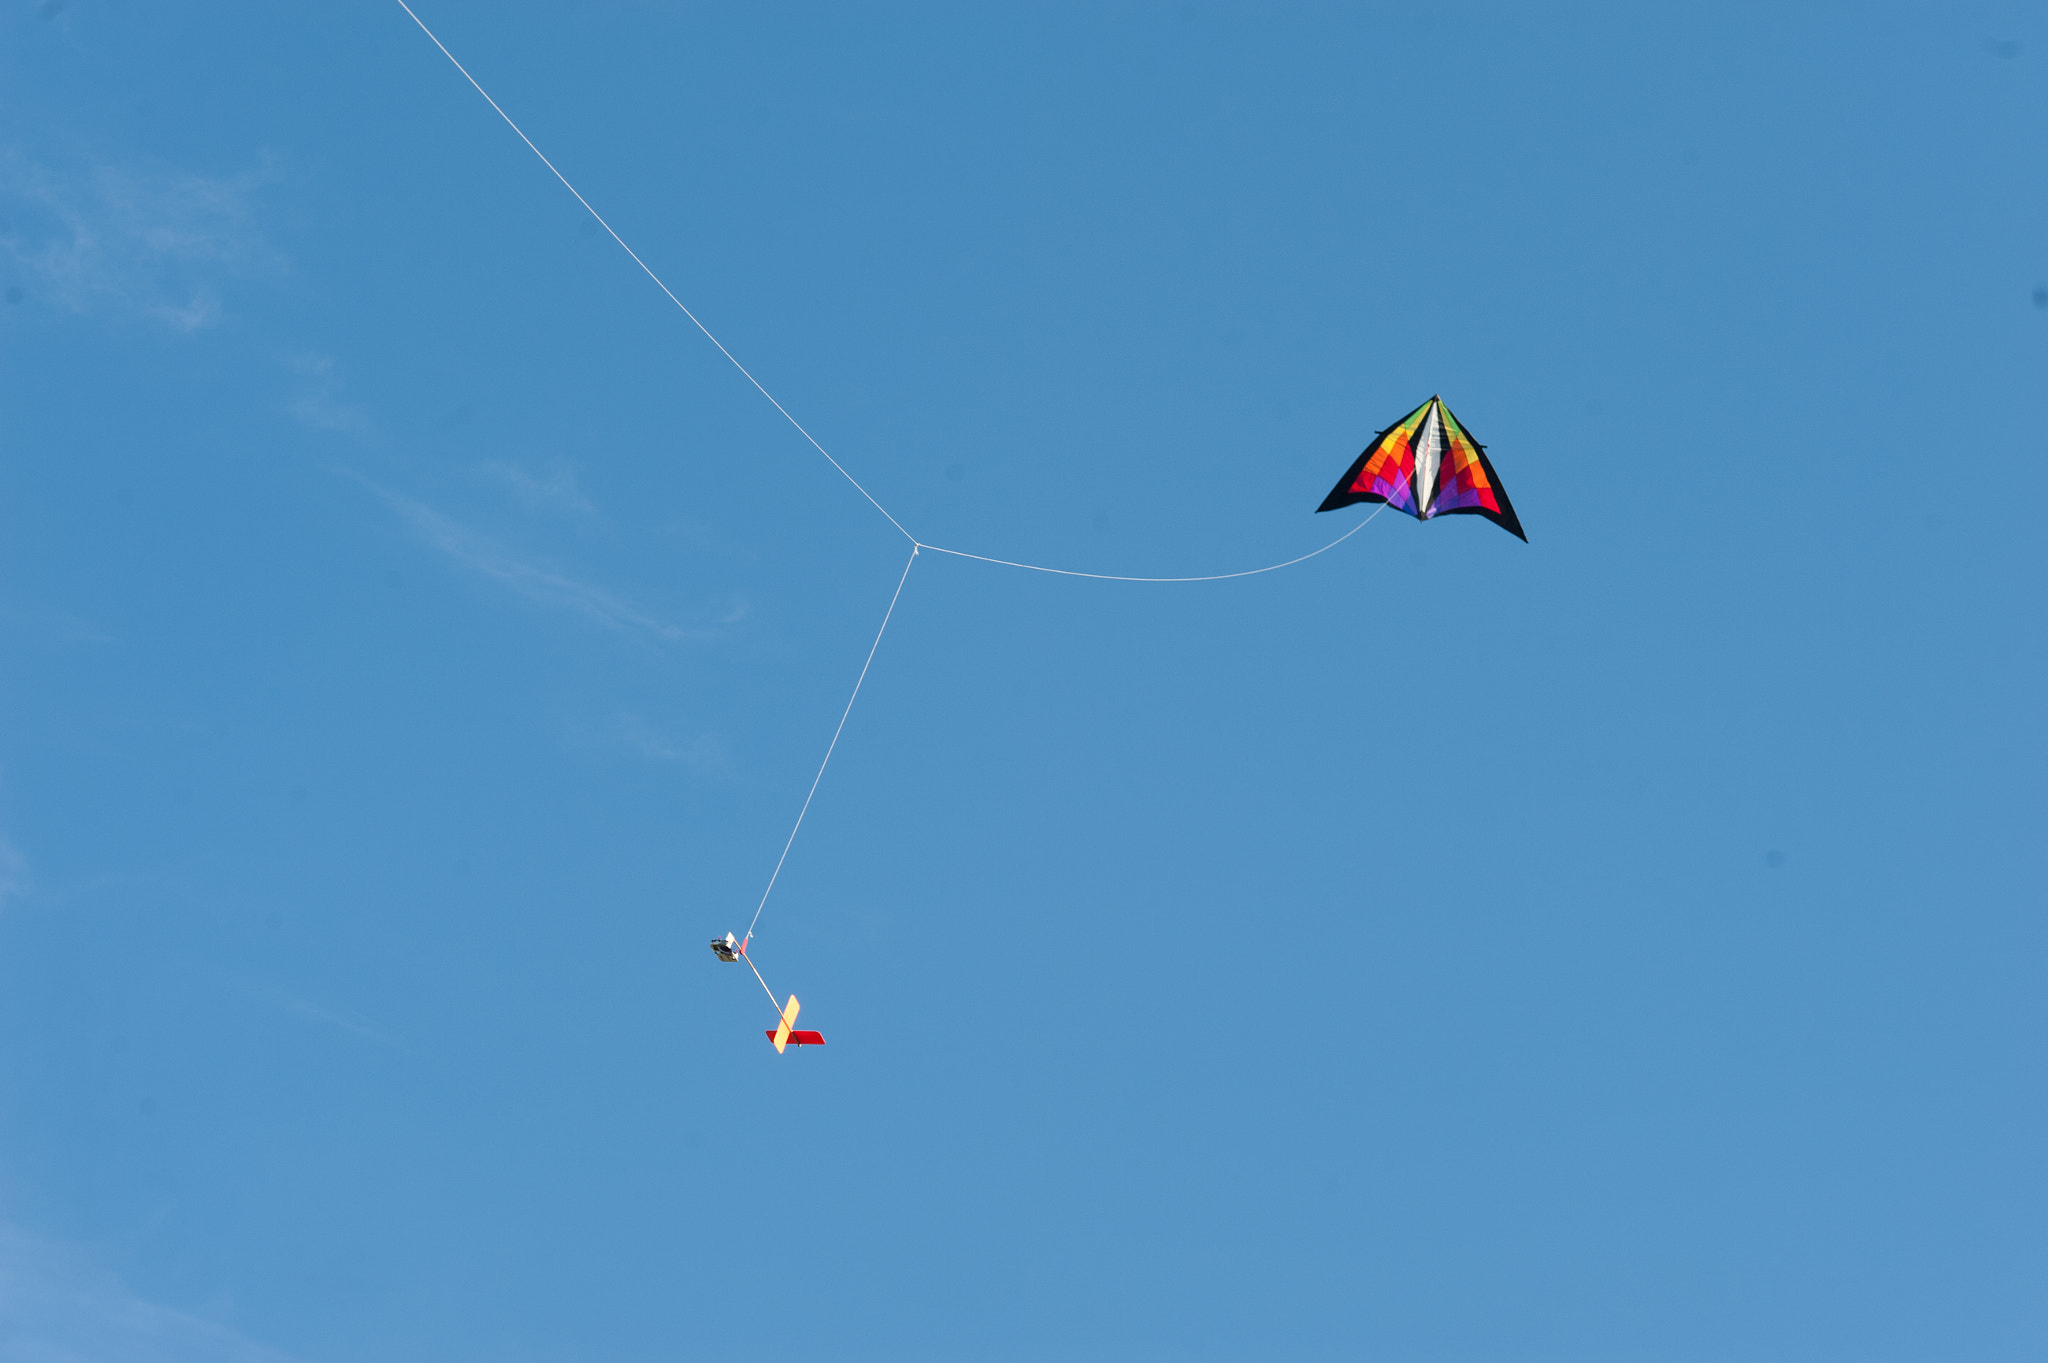 Nikon D700 sample photo. Kite flying in the blue sky photography